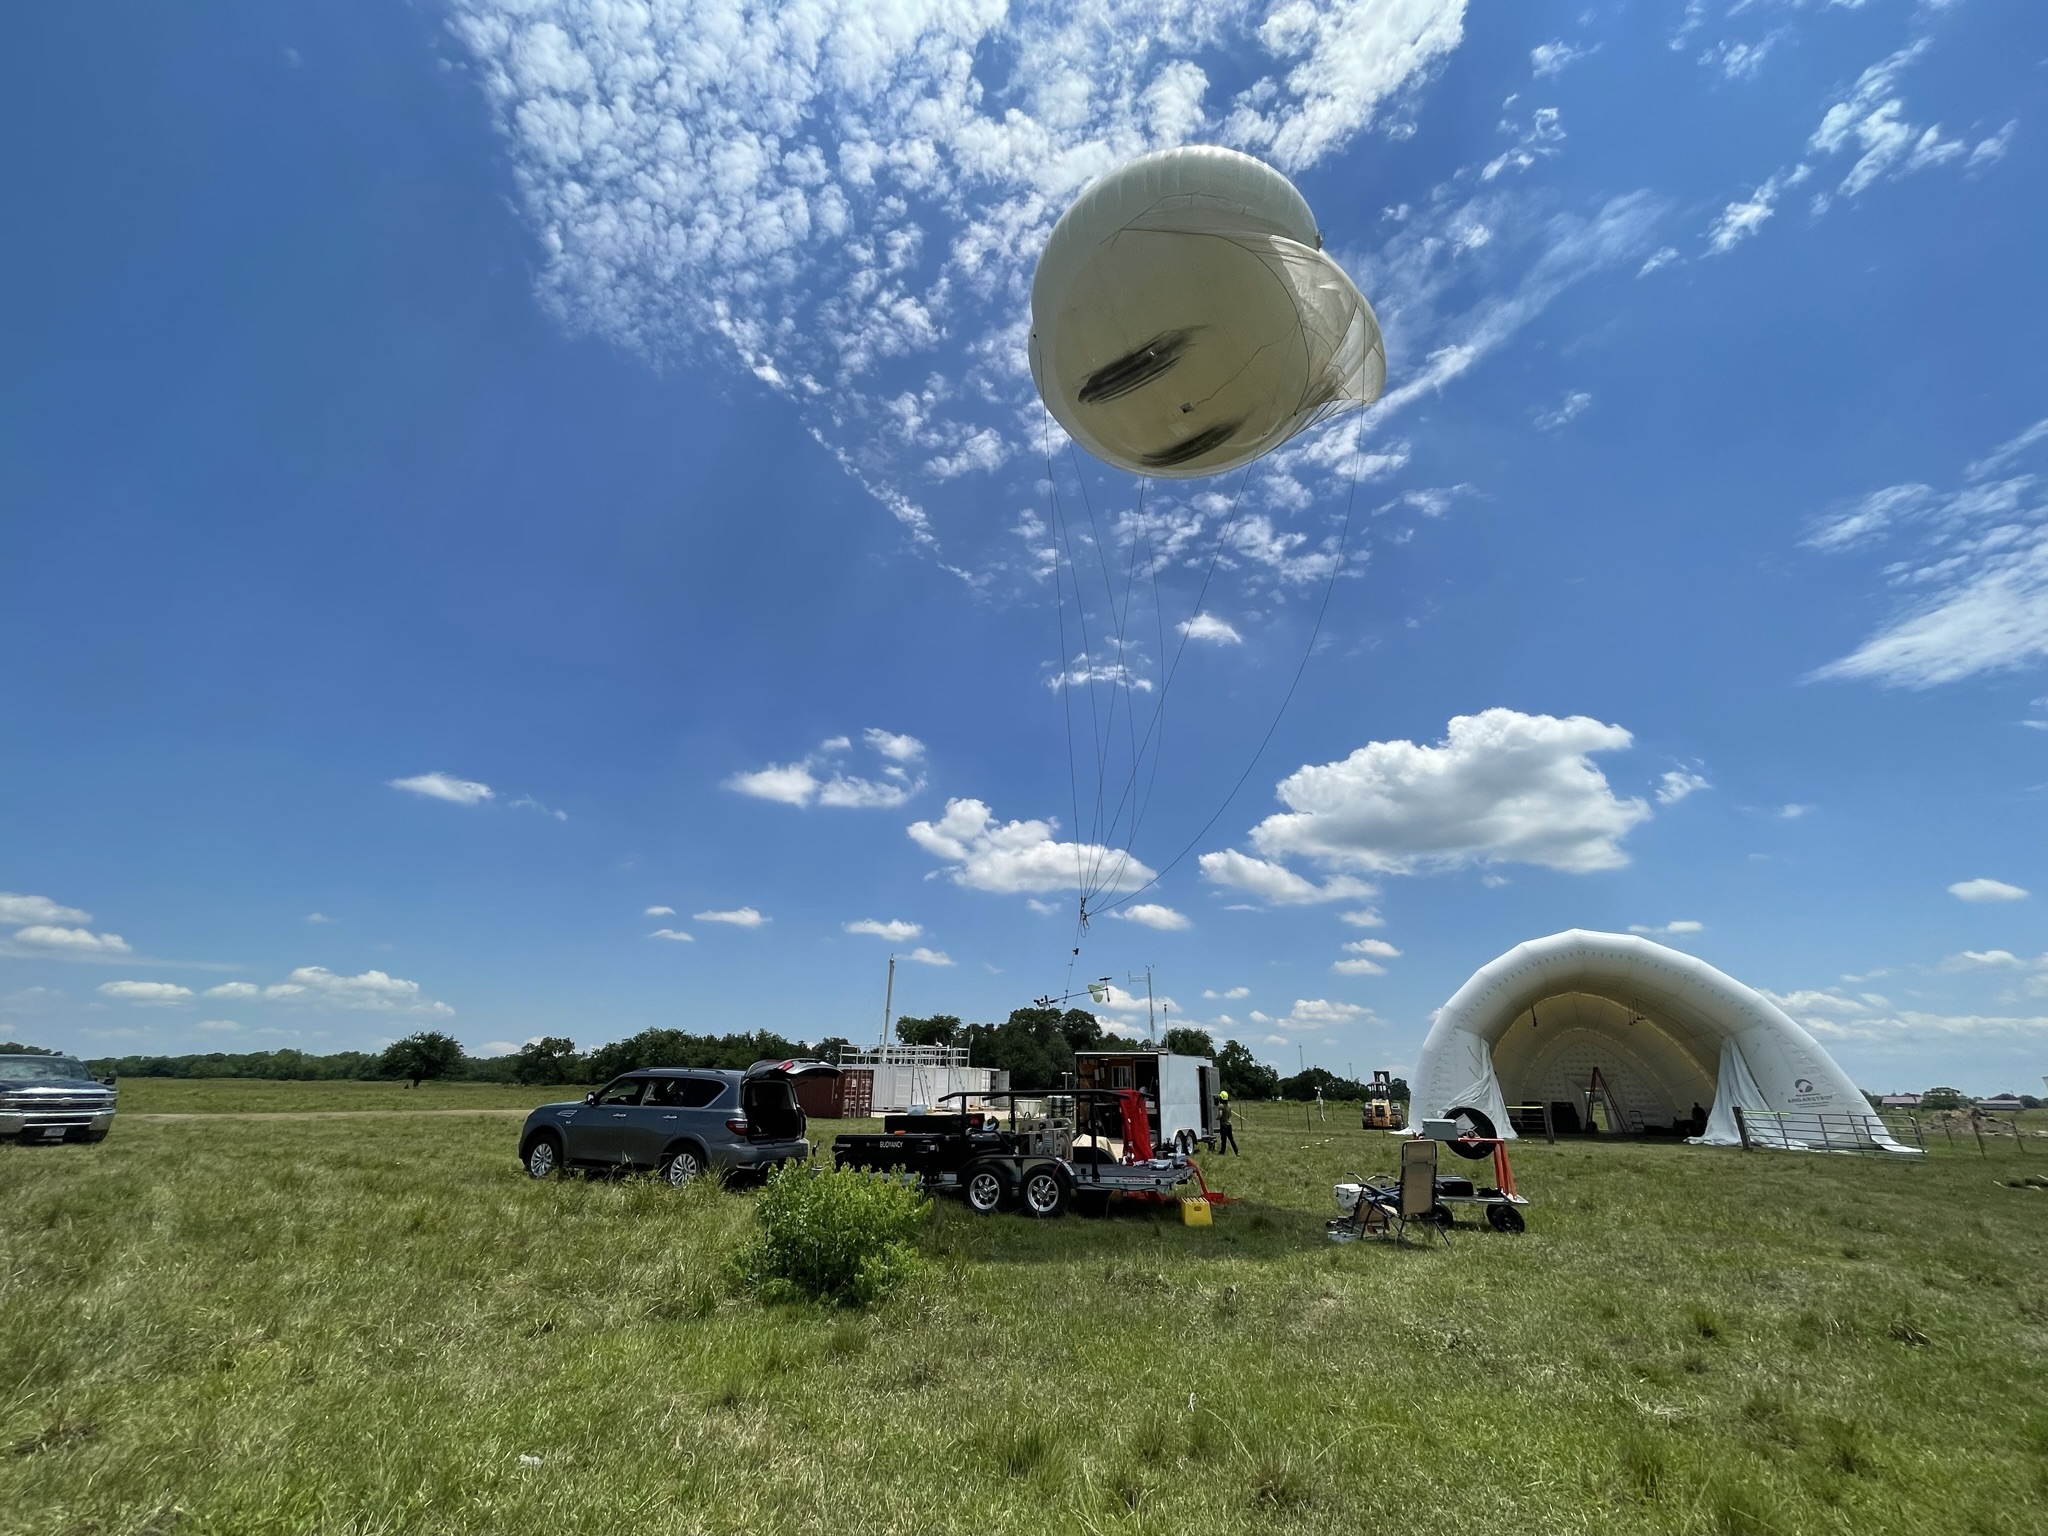 Under a blue sky in June 2022, an instrumented tethered balloon system eases aloft in Guy, Texas. Scientists are profiling atmospheric conditions along a vertical column 1.5 kilometers (0.9 miles) high. Photo is courtesy of Rolanda Jundt, Pacific Northwest National Laboratory. 